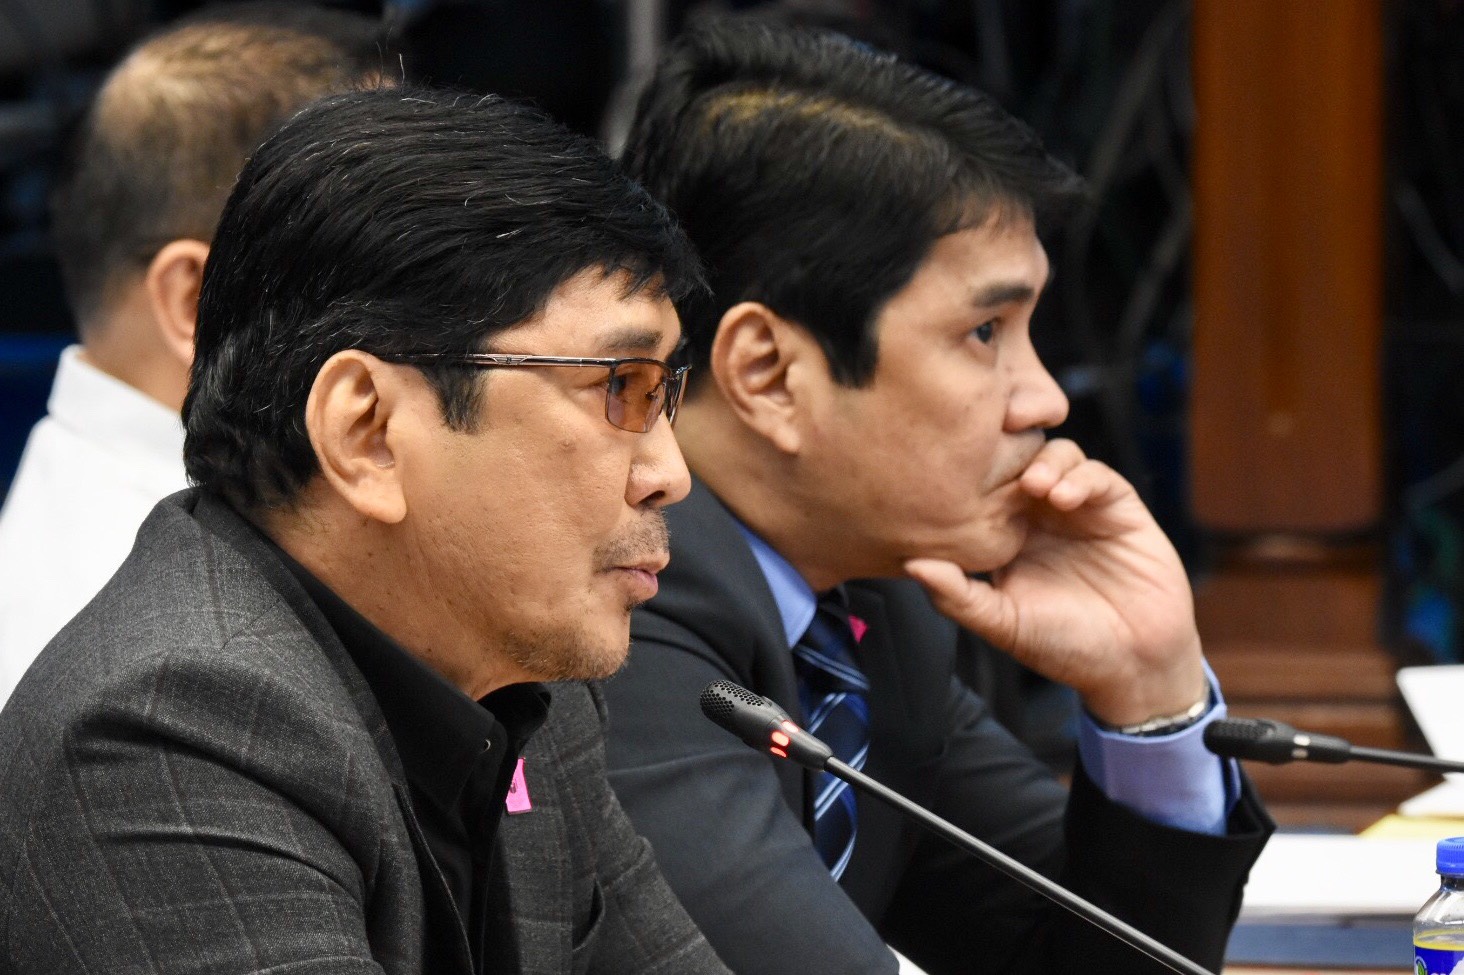 REQUEST APPROVED. The Tulfo brothers acquired security details by applying for them. Photo by Angie de Silva  